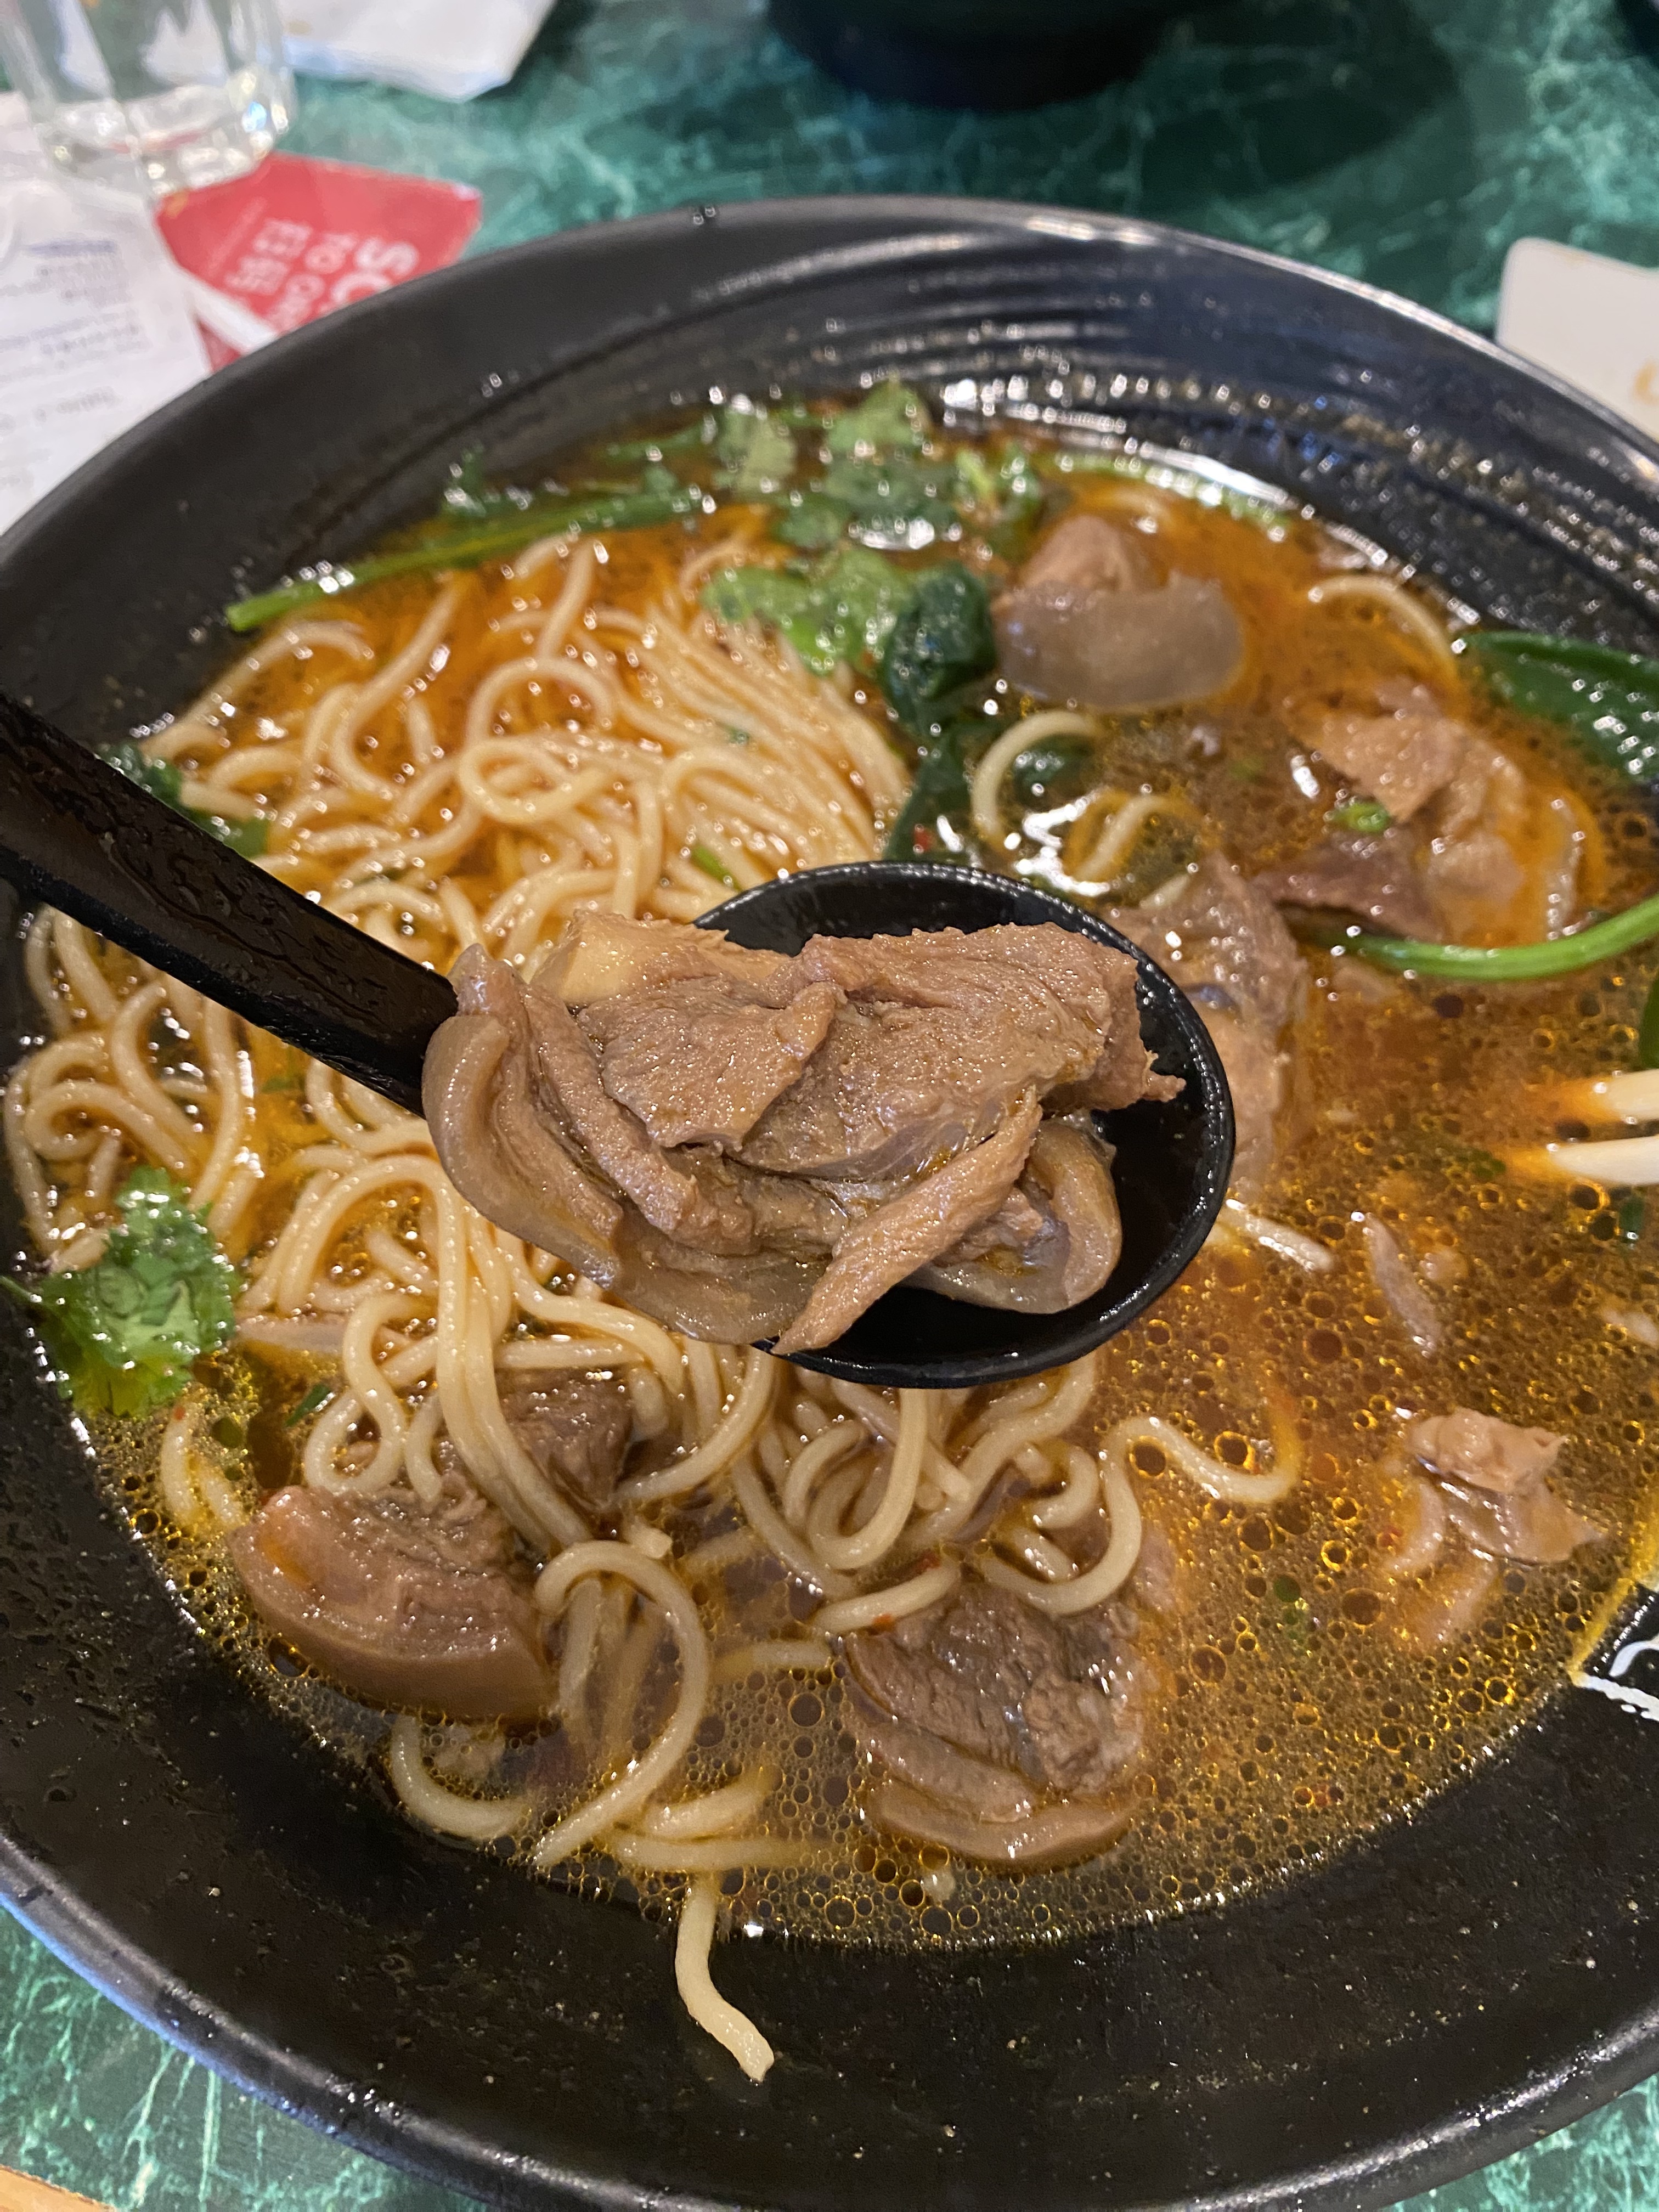 A bowl of noodles in broth with a spoon held up to display pieces of meat included in the soup.